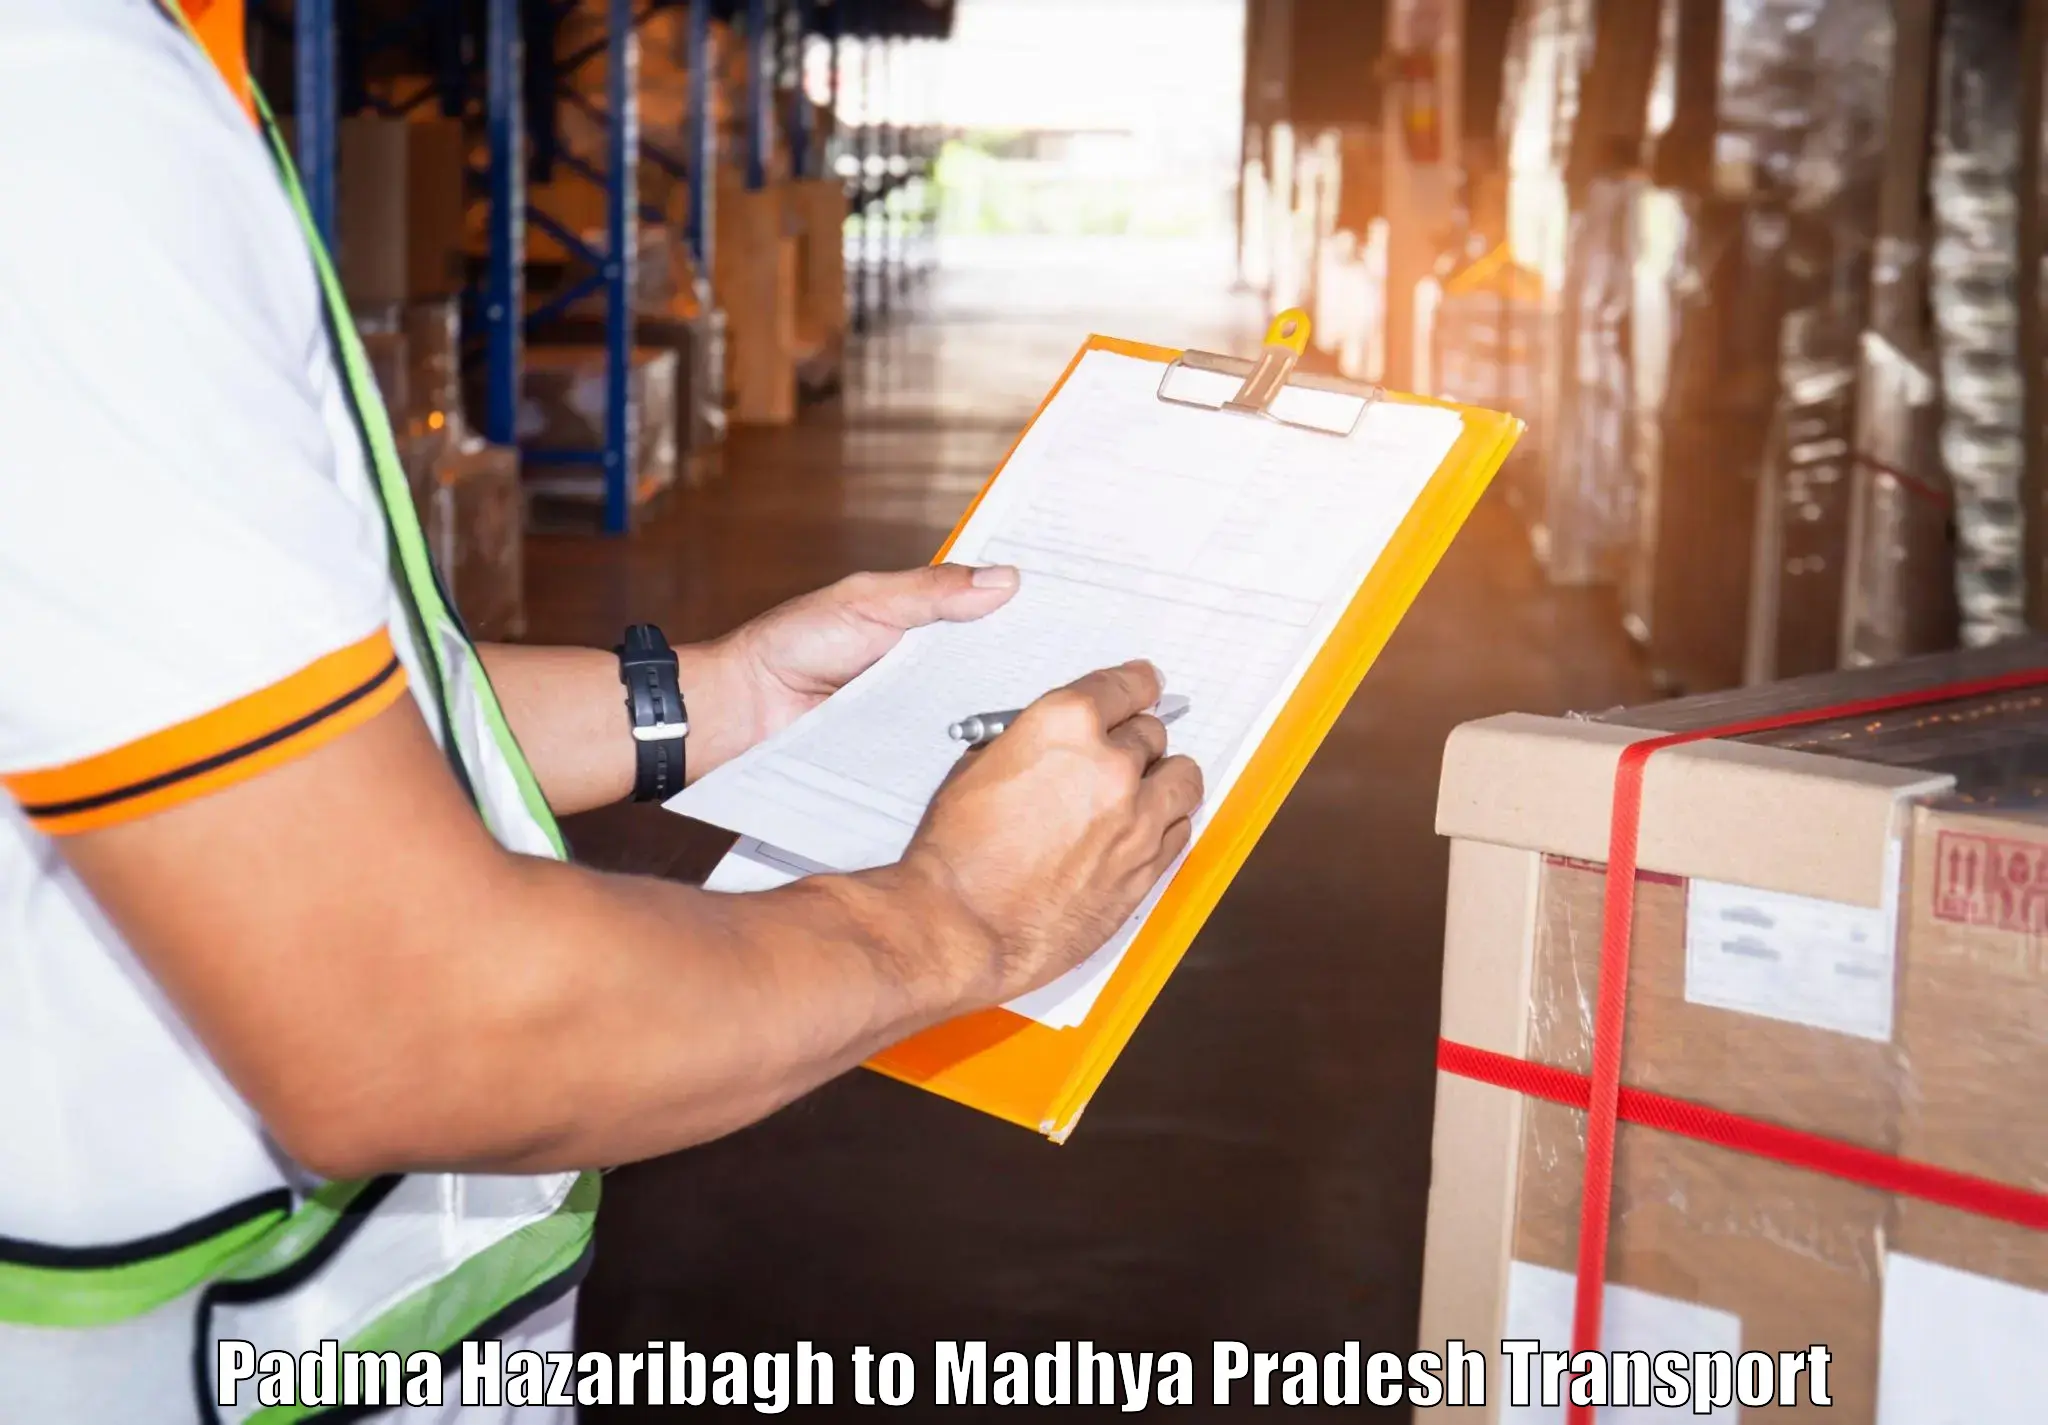 Truck transport companies in India Padma Hazaribagh to Indore